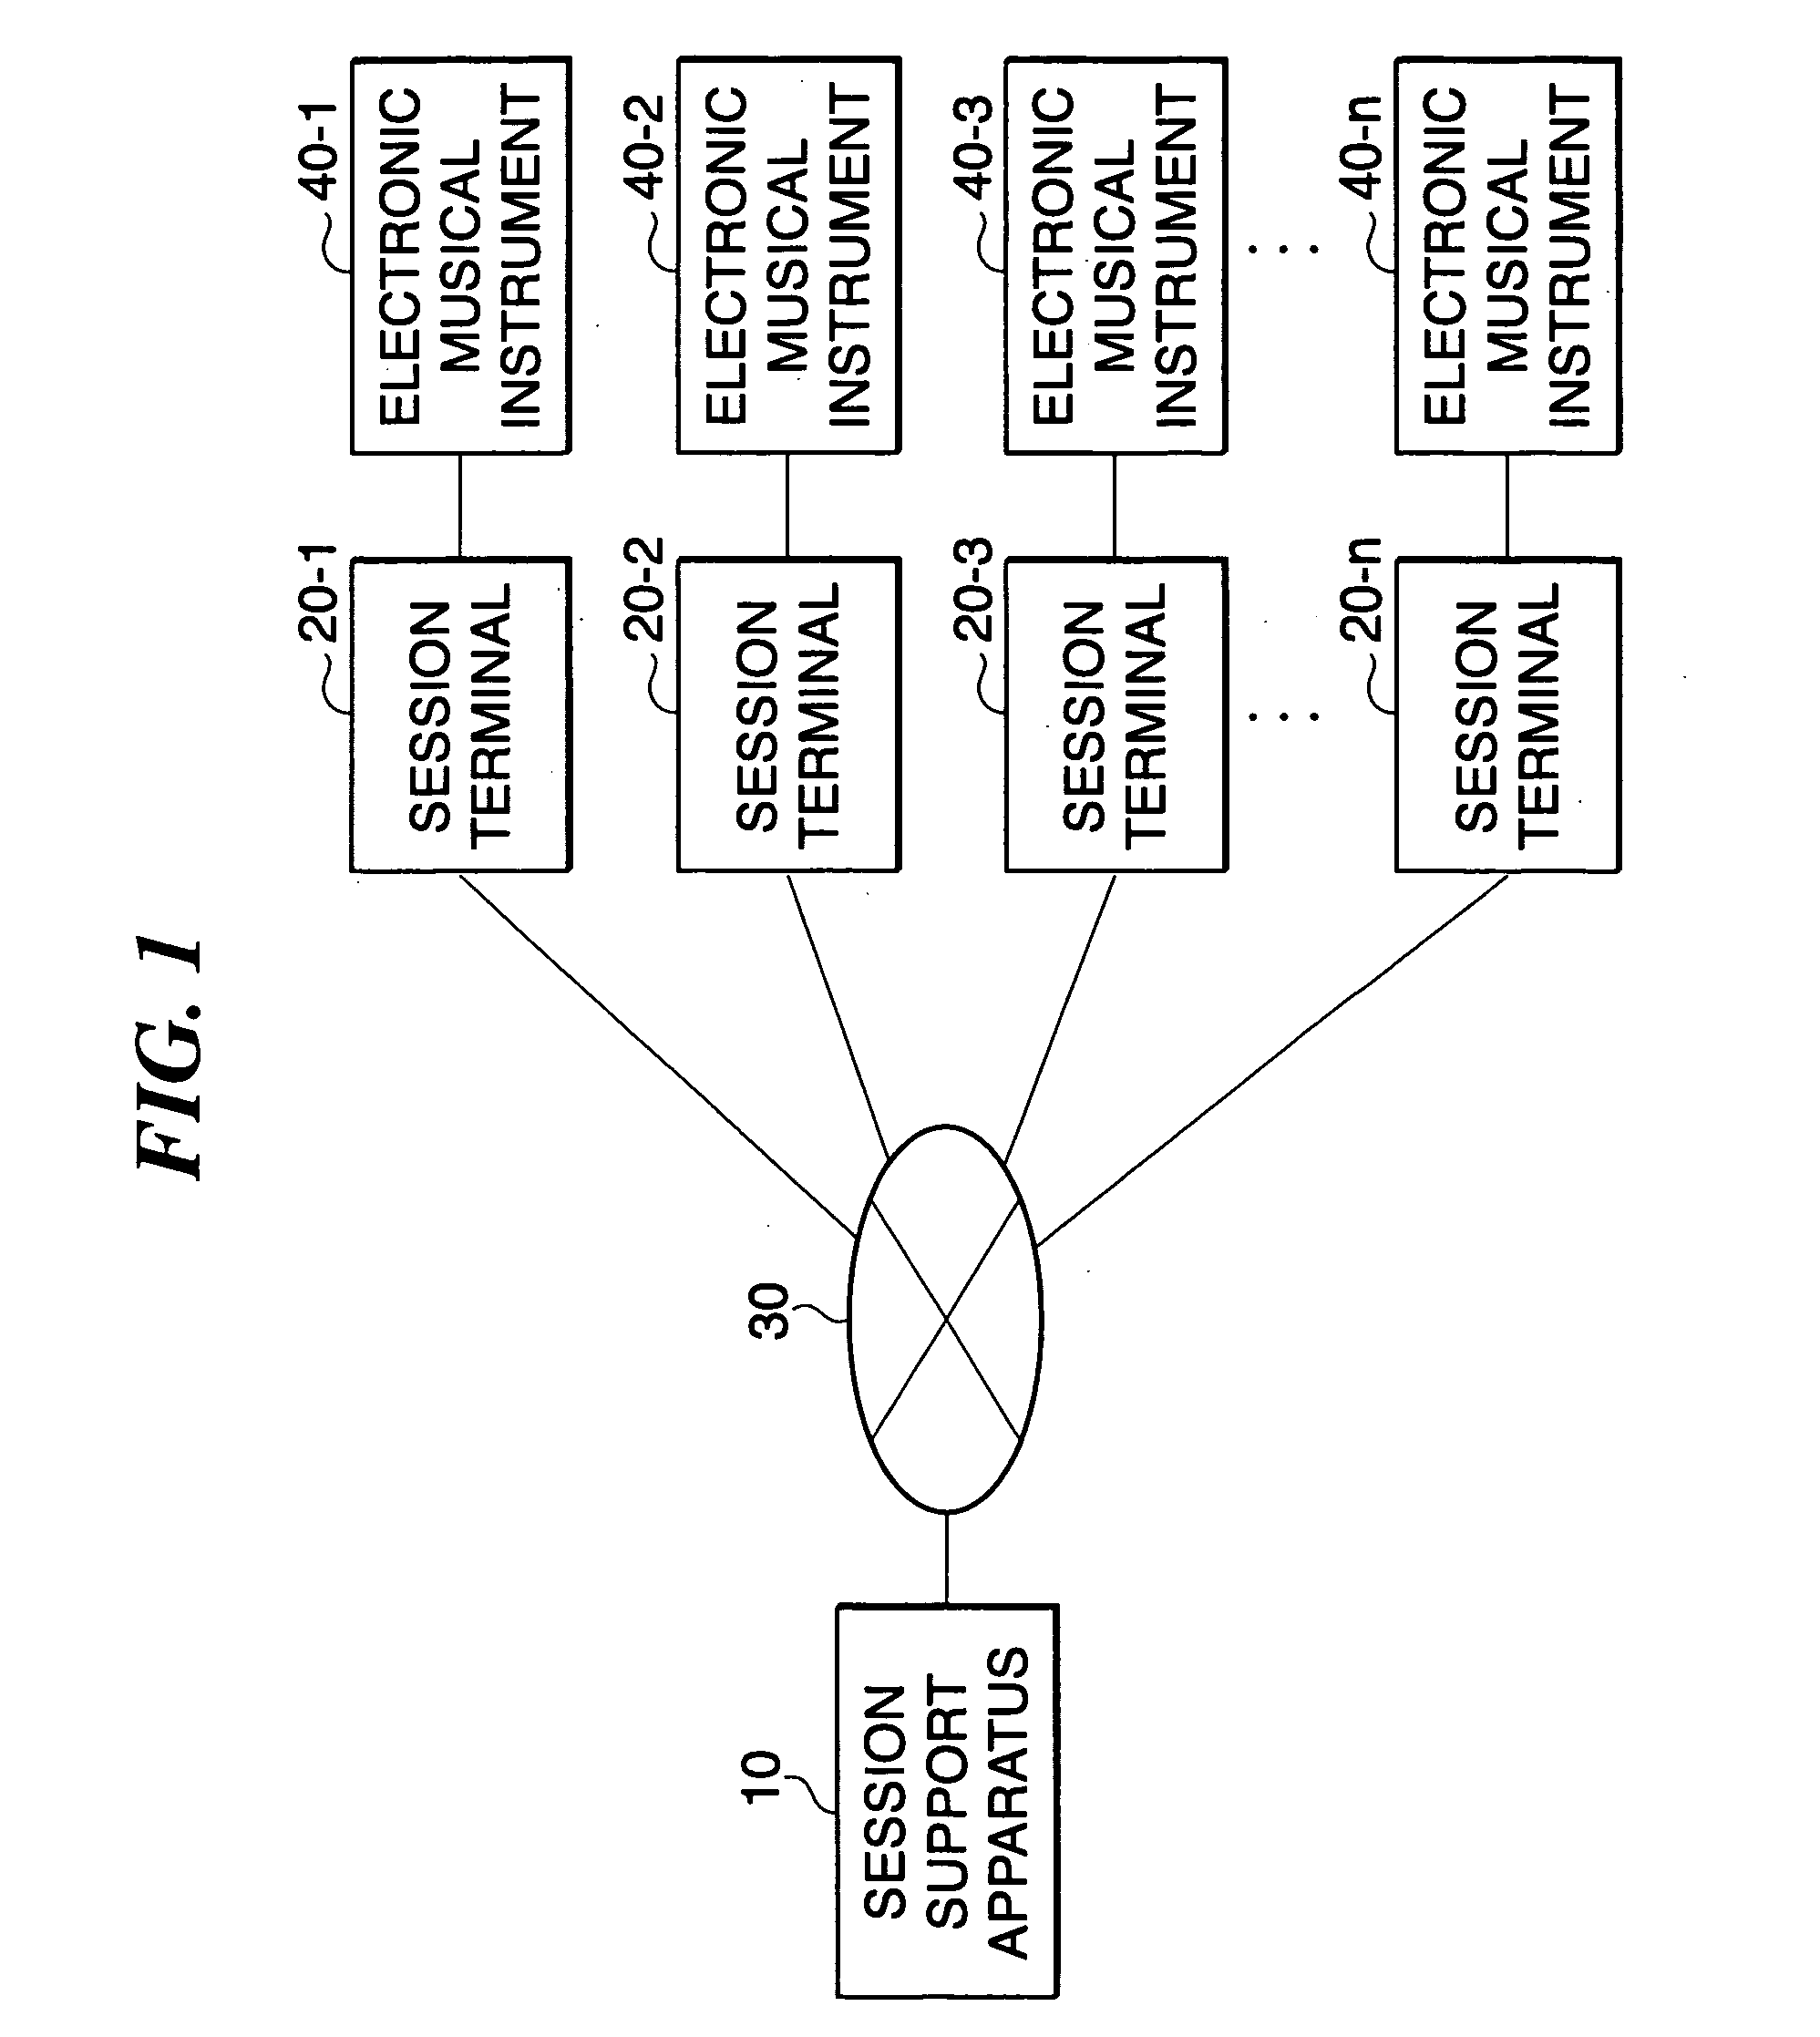 Music session support method, musical instrument for music session, and music session support program